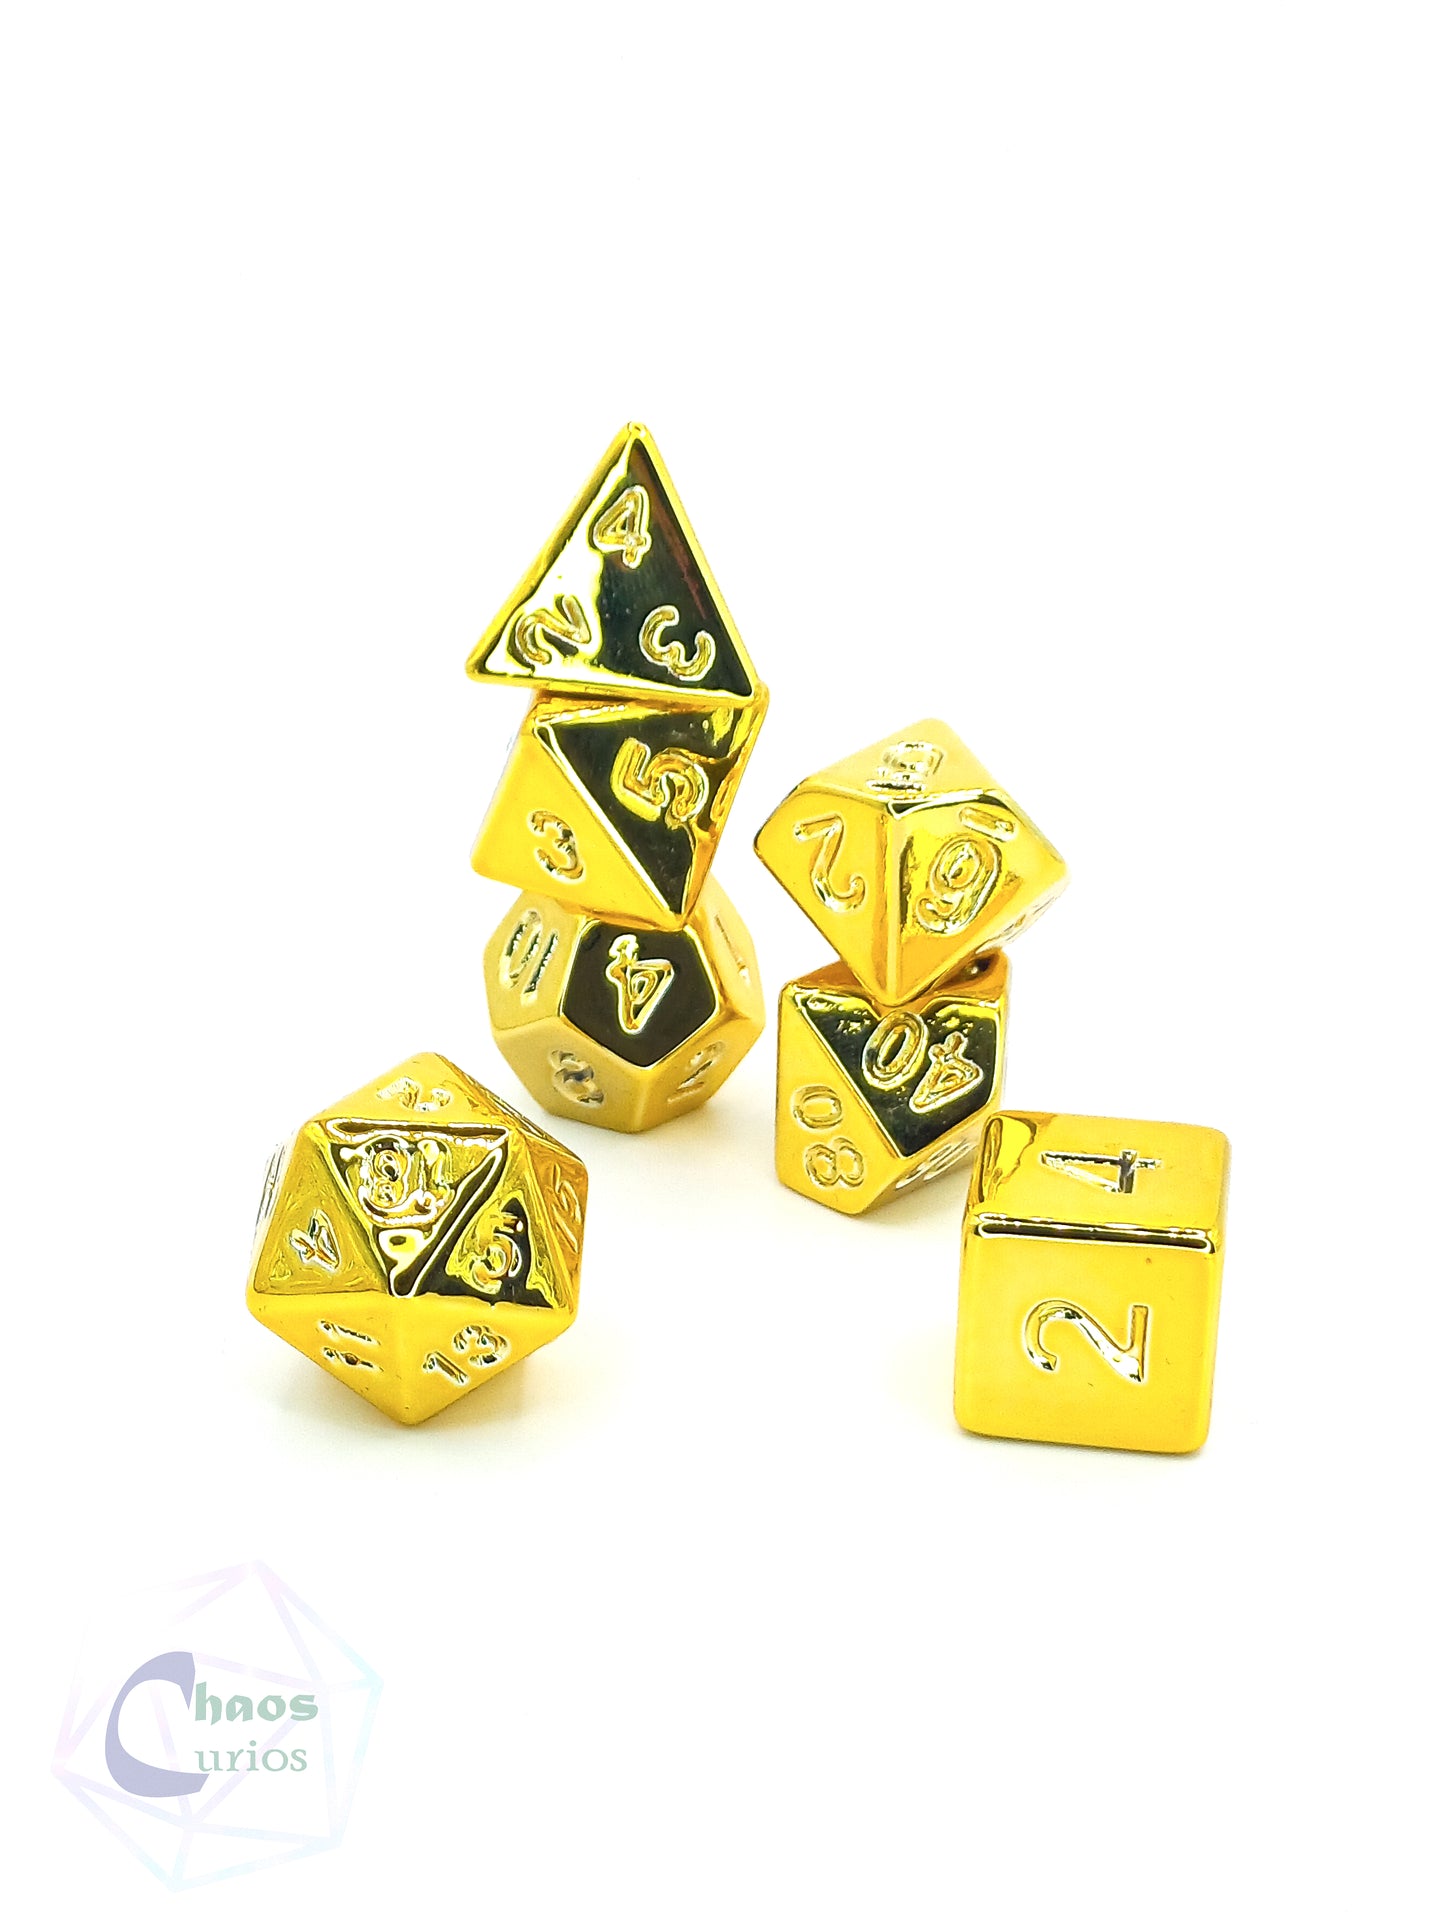 Fool's Gold Electroplated 7-piece Dice Set